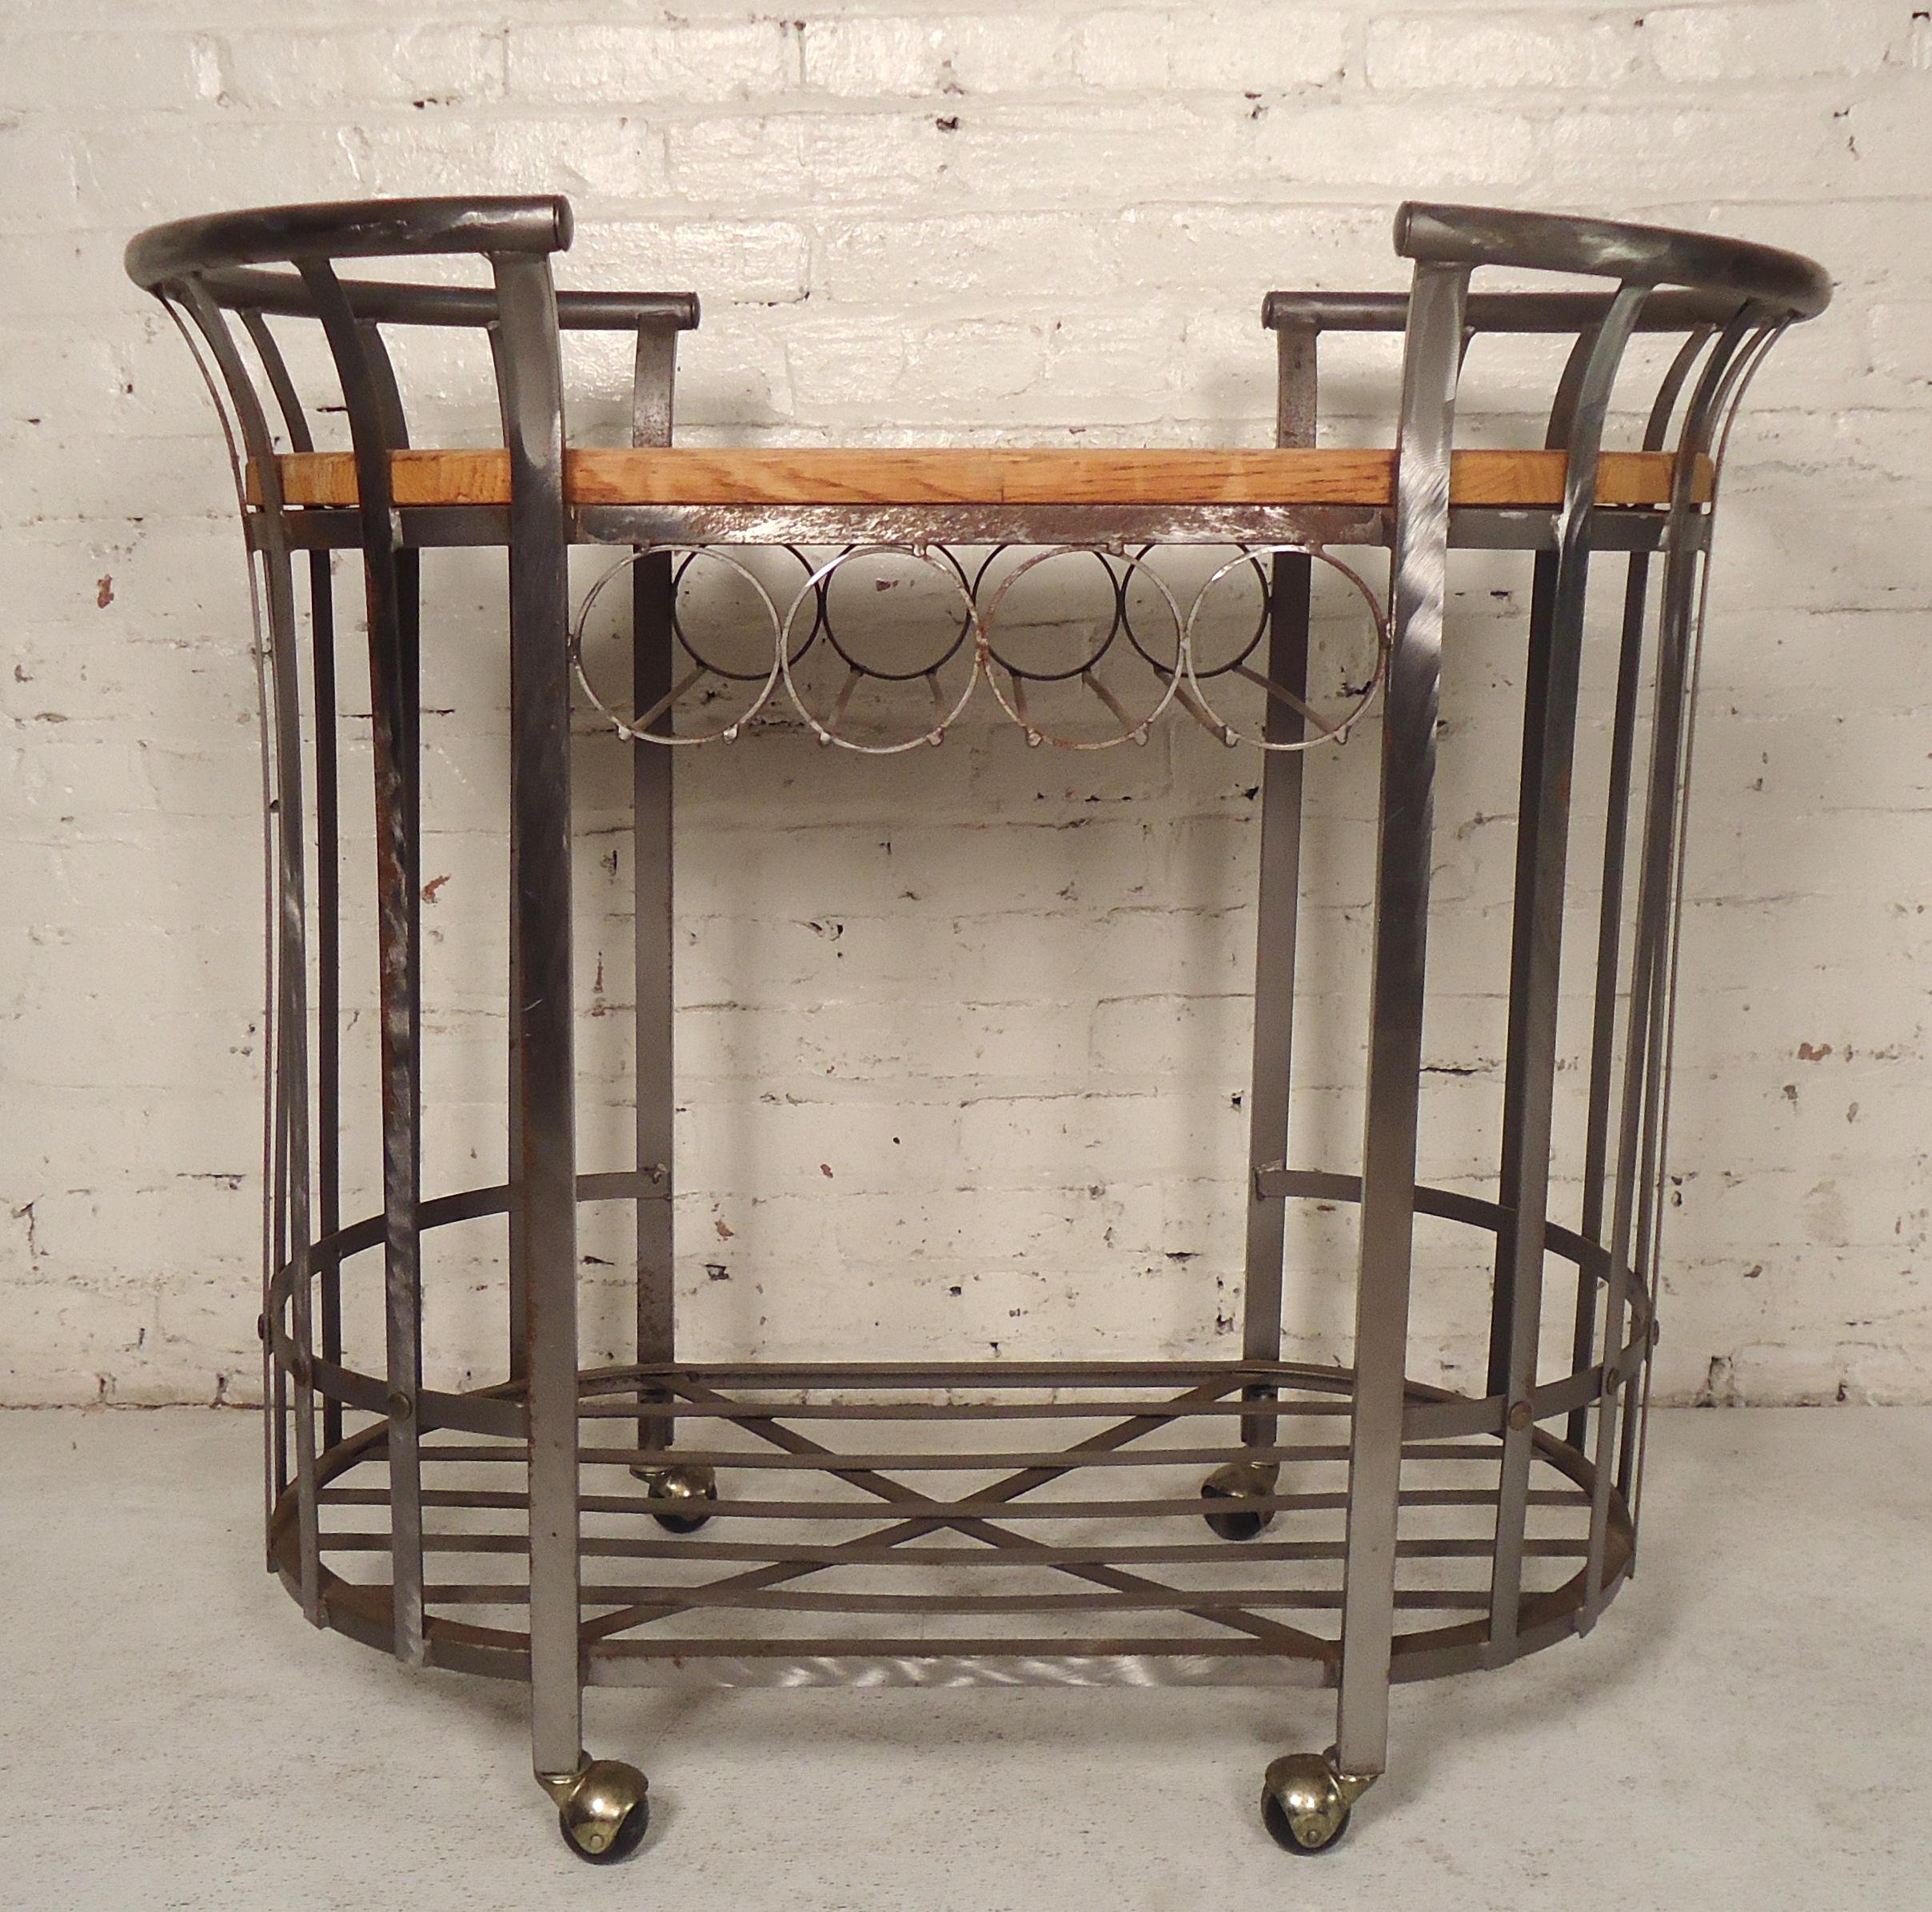 Metal cart with brush finish and butcher block wood top. Features lower shelf and wine rack.

(Please confirm item location NY or NJ with dealer).
 